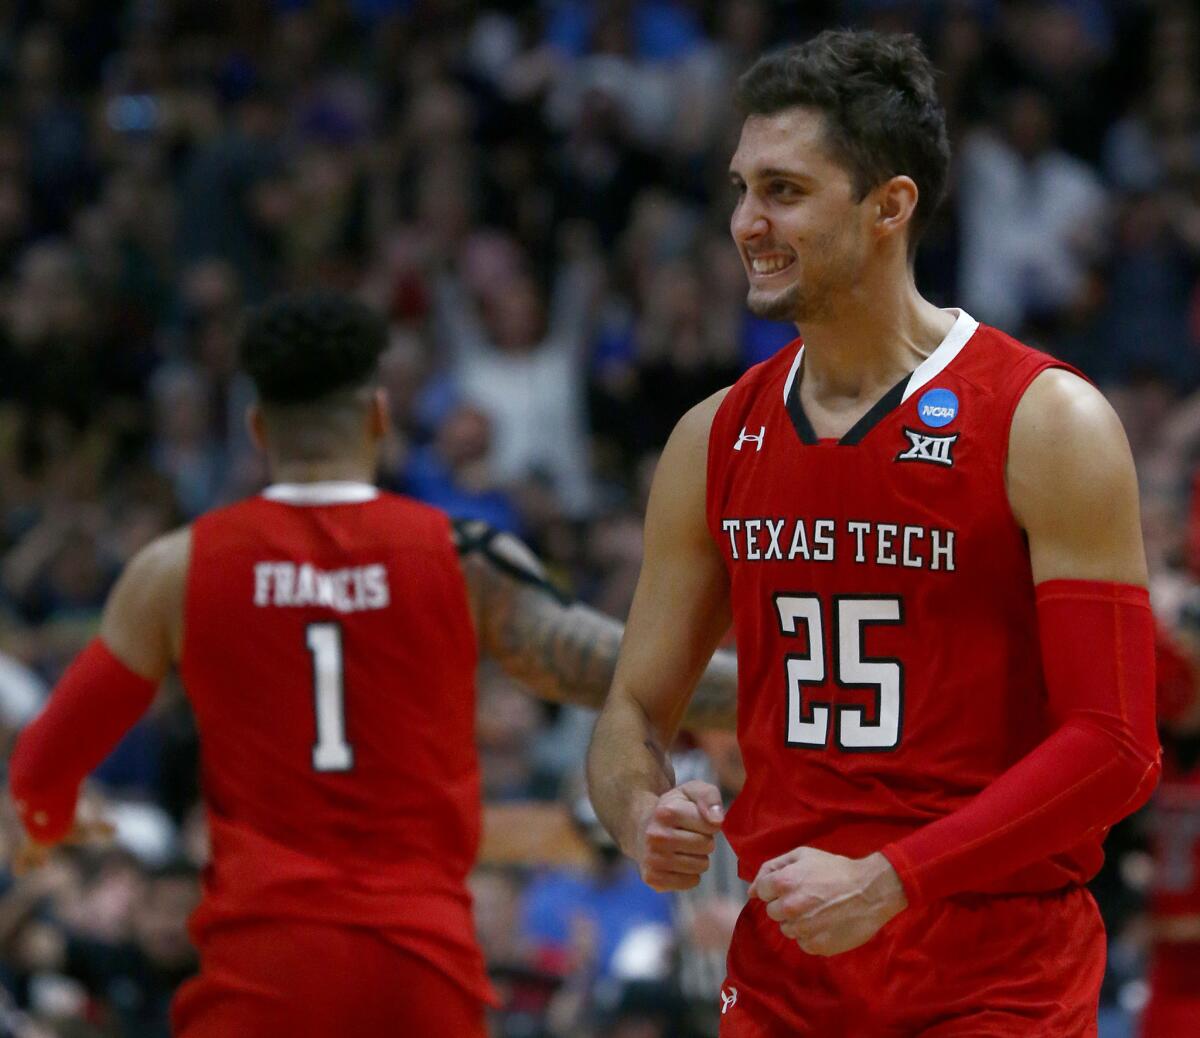 Texas Tech guard Davide Moretti celebrates after making a three-point shot against Gonzaga in the second half of the NCAA tournament West Regional Final at the Honda Center on Saturday.